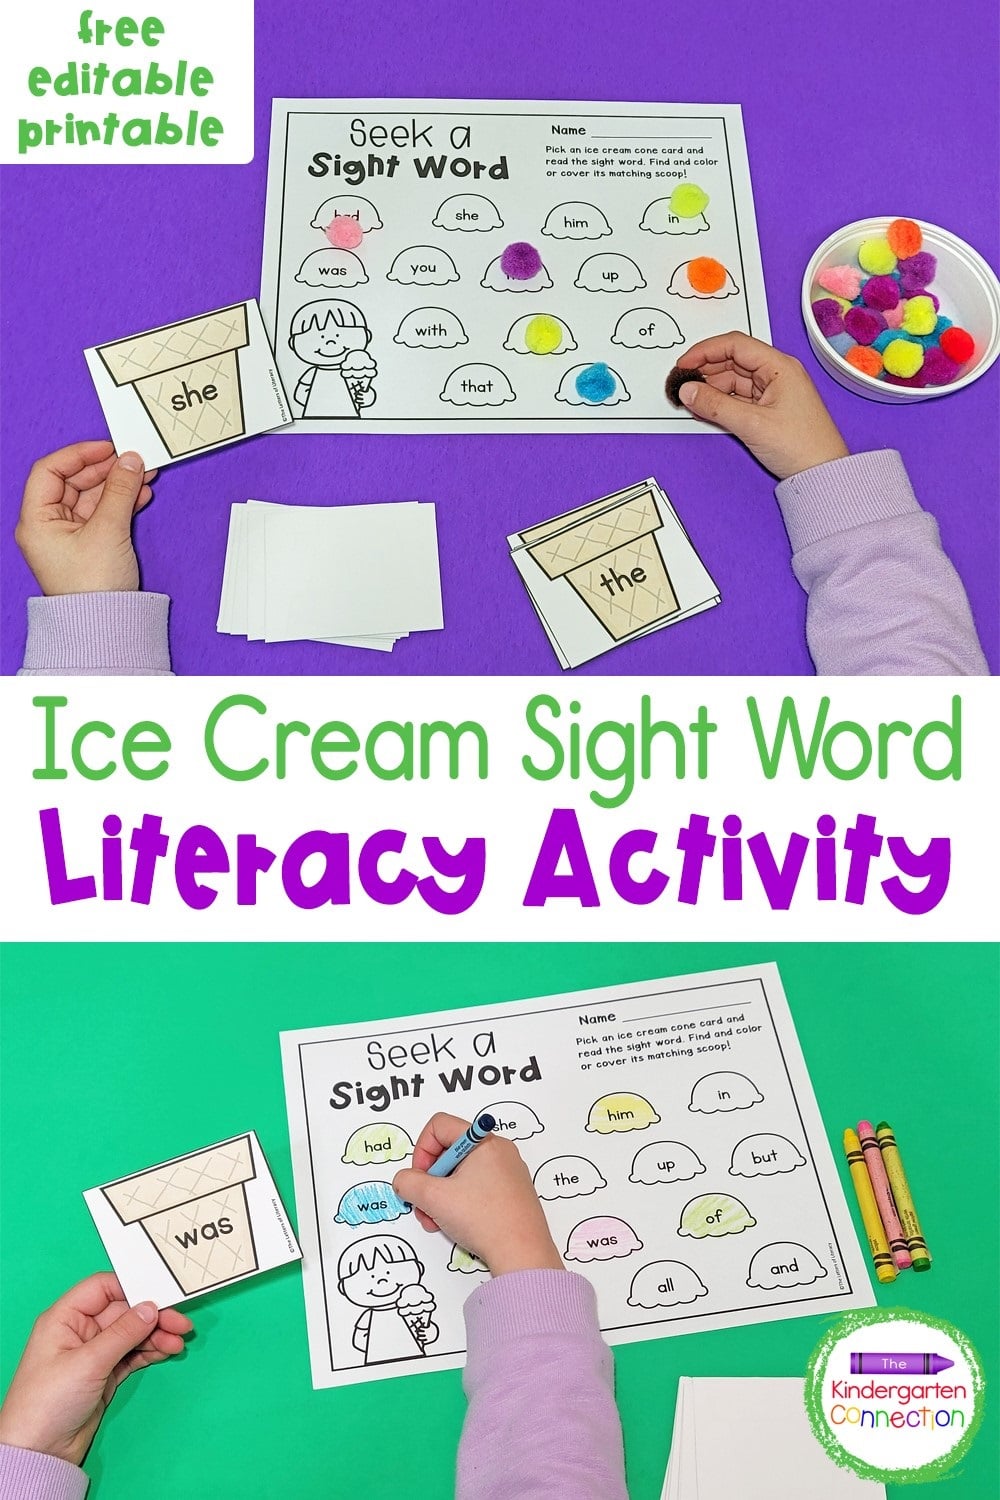 Grab this free Editable Ice Cream Cone Sight Word Game and use it in your Kindergarten literacy centers or small groups!